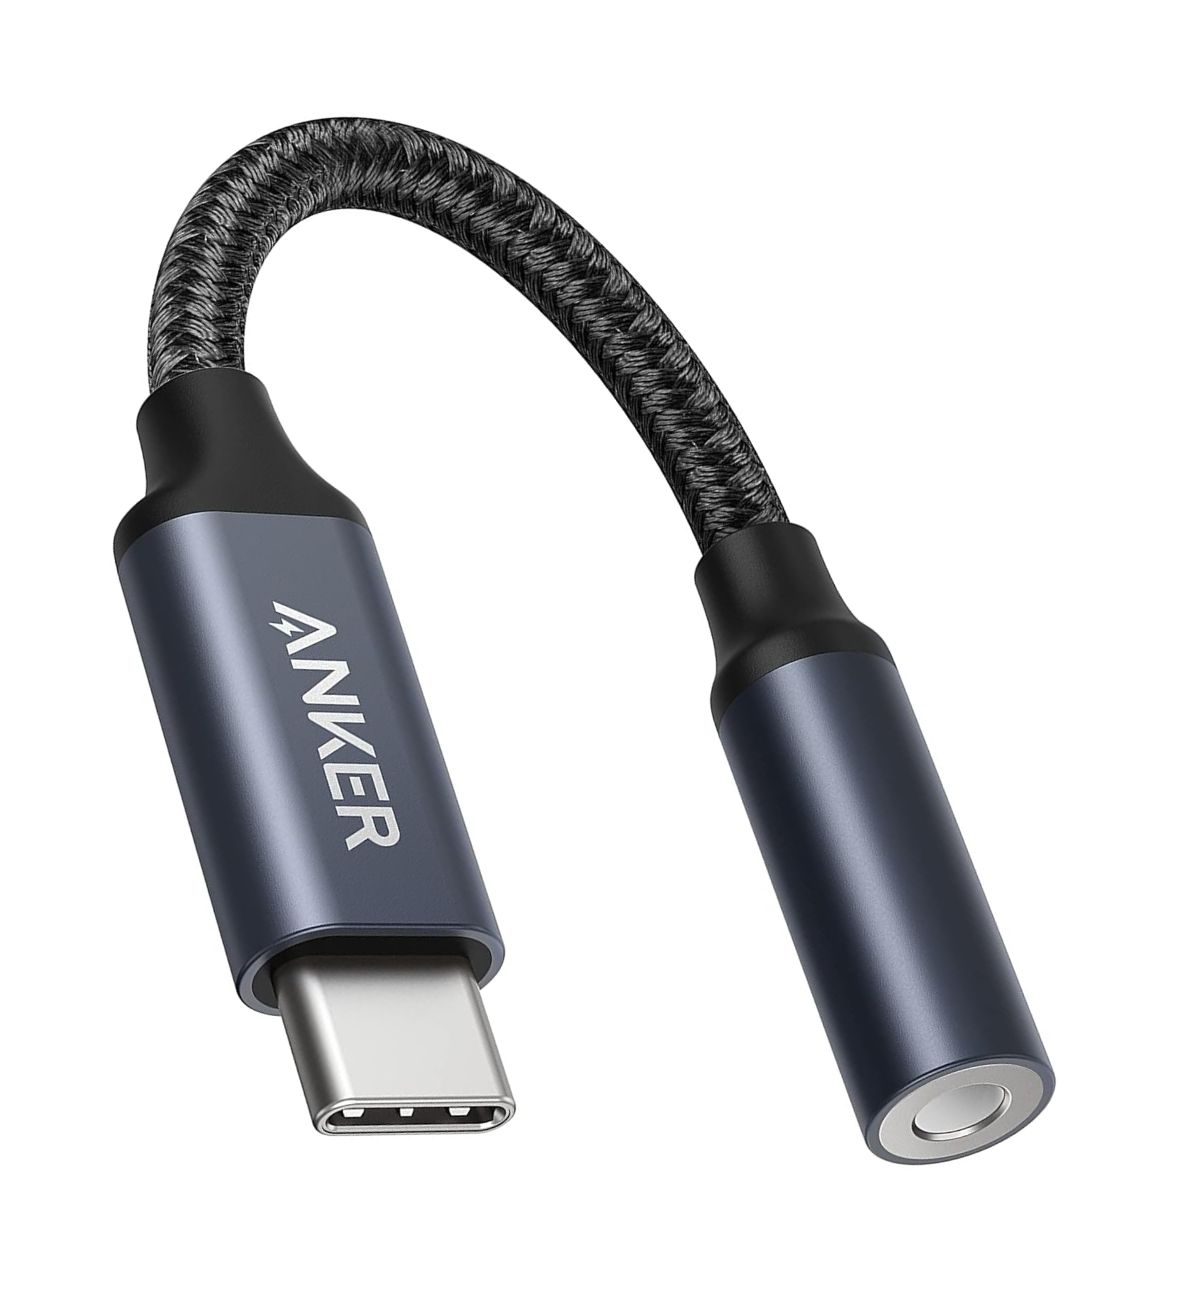 Close-up image of the Anker USB-C to 3.5mm Audio Adapter, highlighting the USB-C connector and the 3.5mm female headphone jack. Text overlay: "Connect your favorite 3.5mm headphones to your USB-C device (UK Compatible)